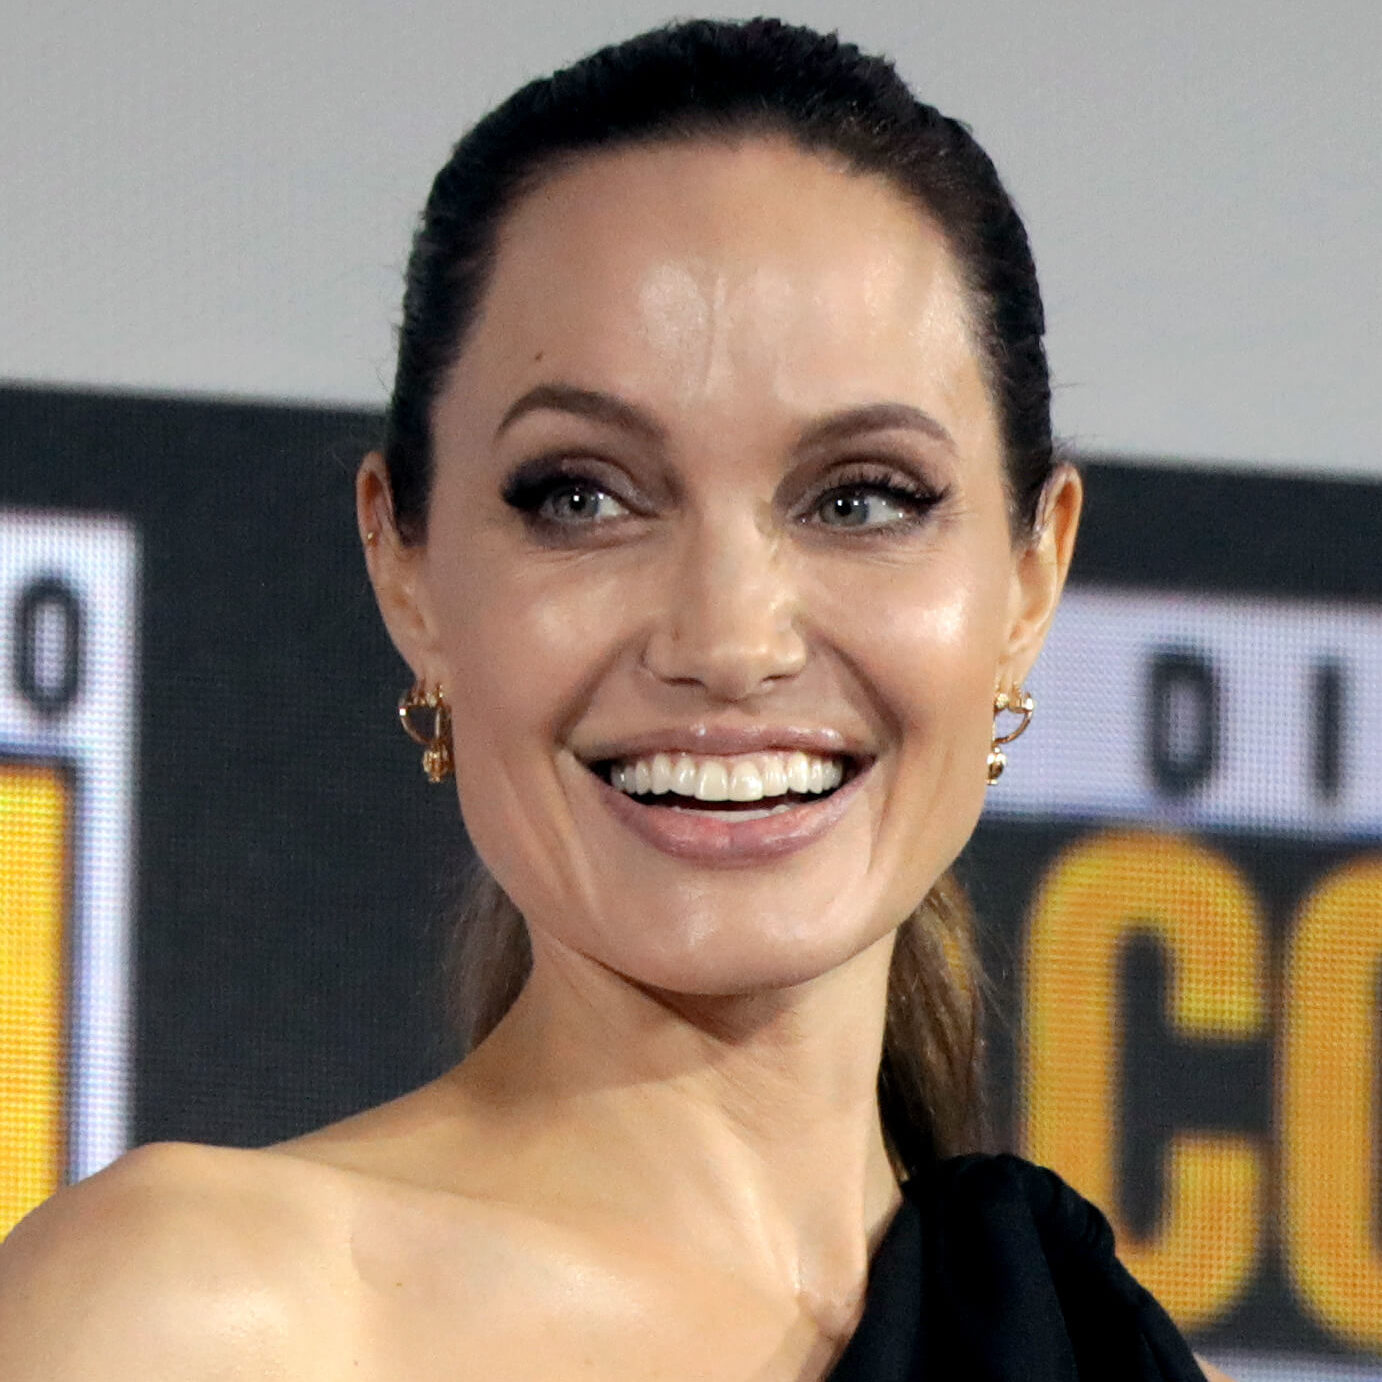 Angelina Jolie choosing color for neutral skin lifestylemajor edited